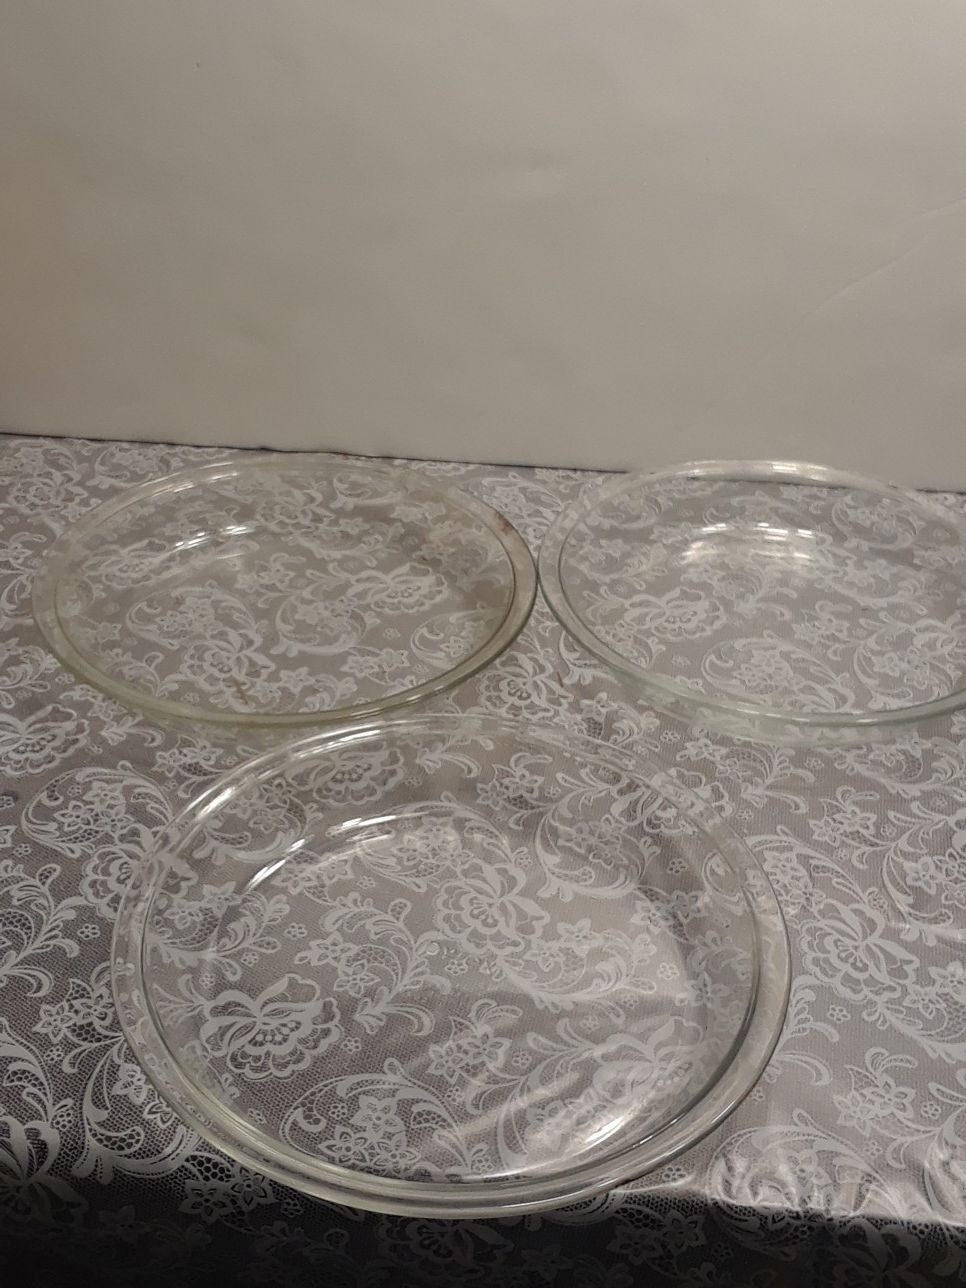 Three pyrex glass dishes